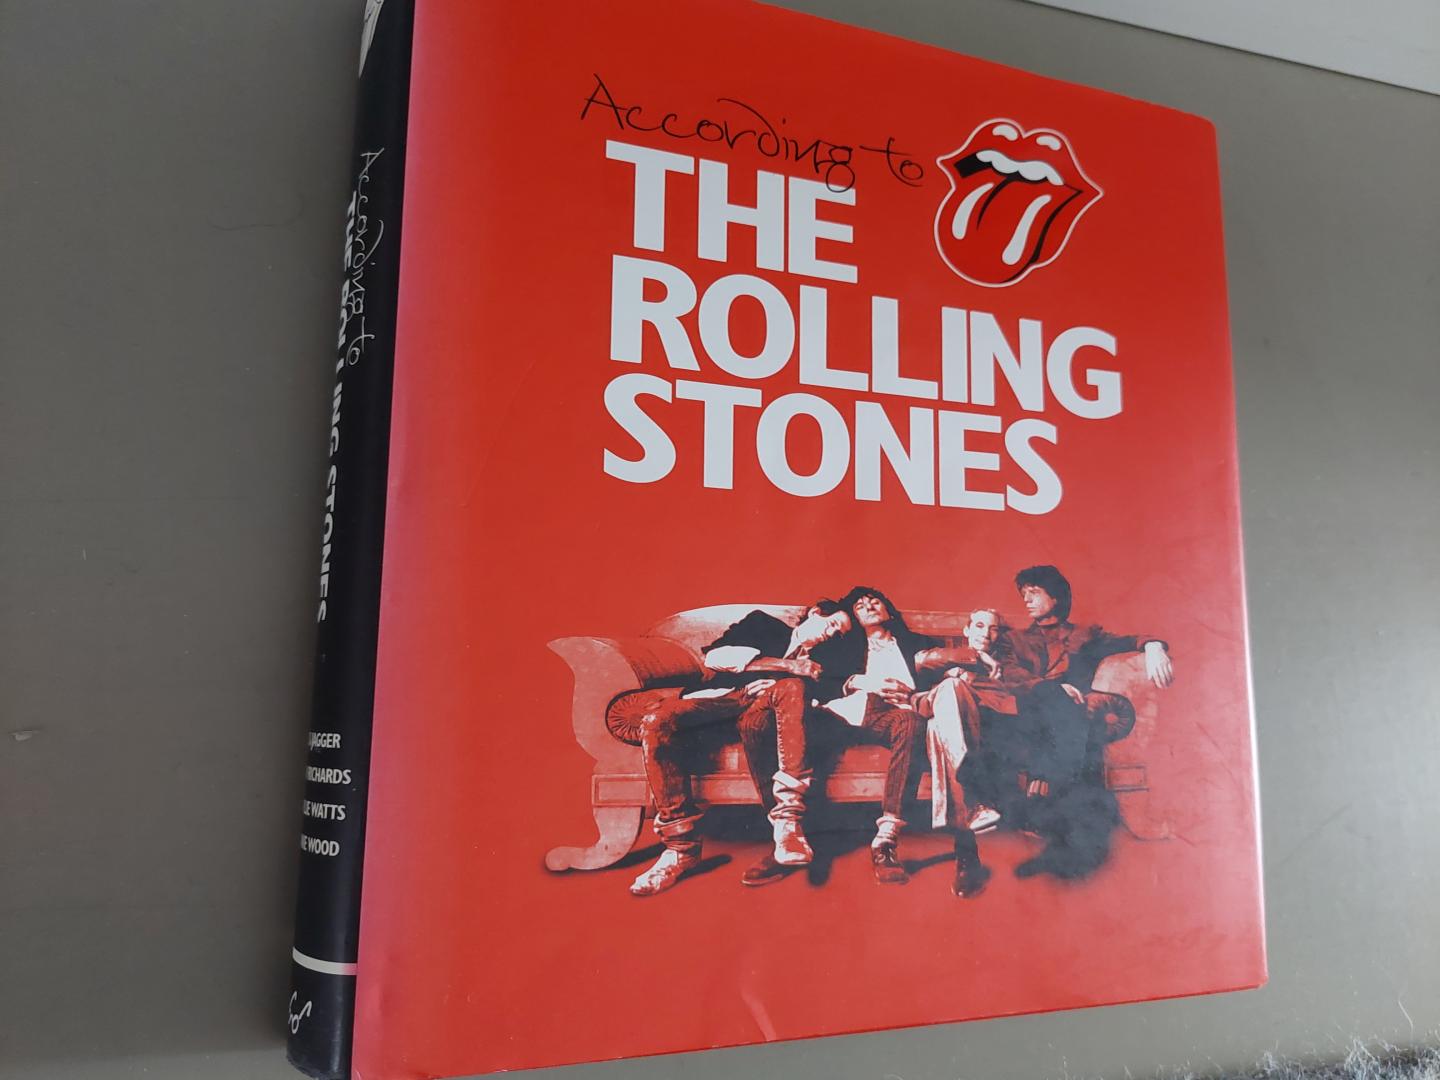 Edited by Dora Loewenstein and Philip Dodd - According to The Rolling Stones